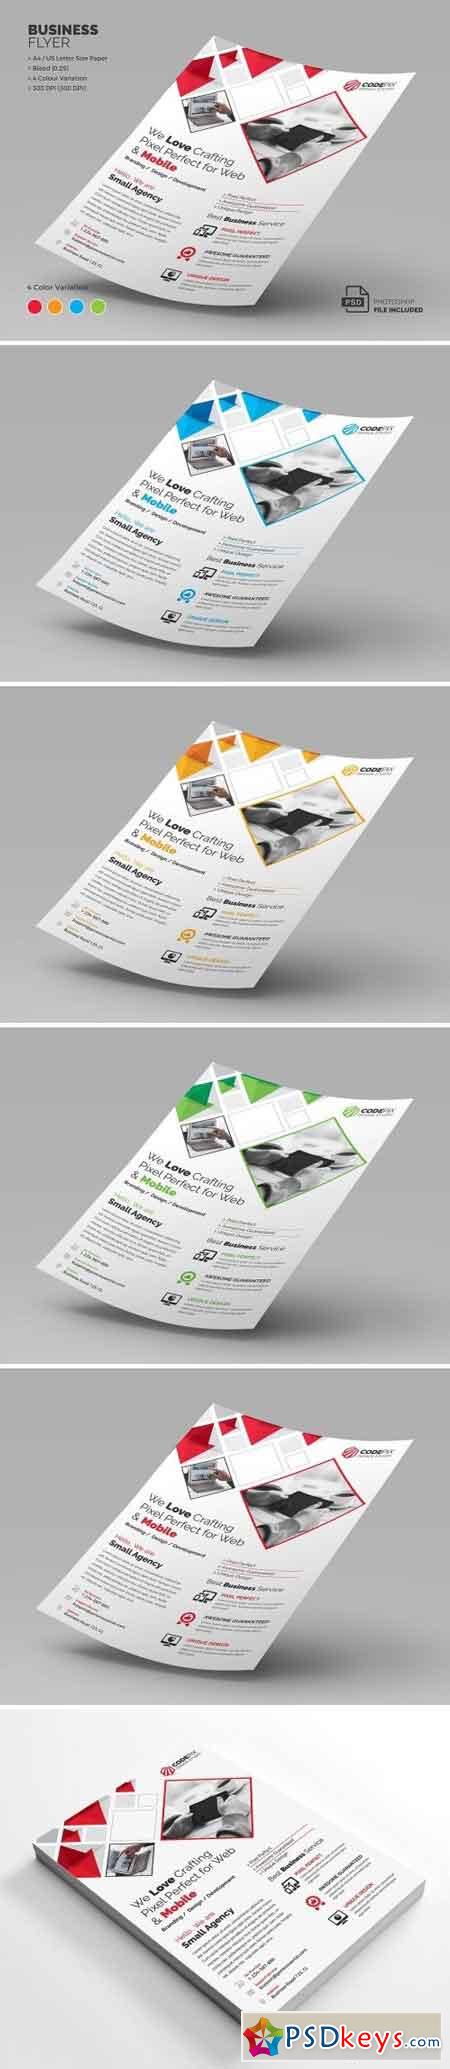 Business Flyer 2091585